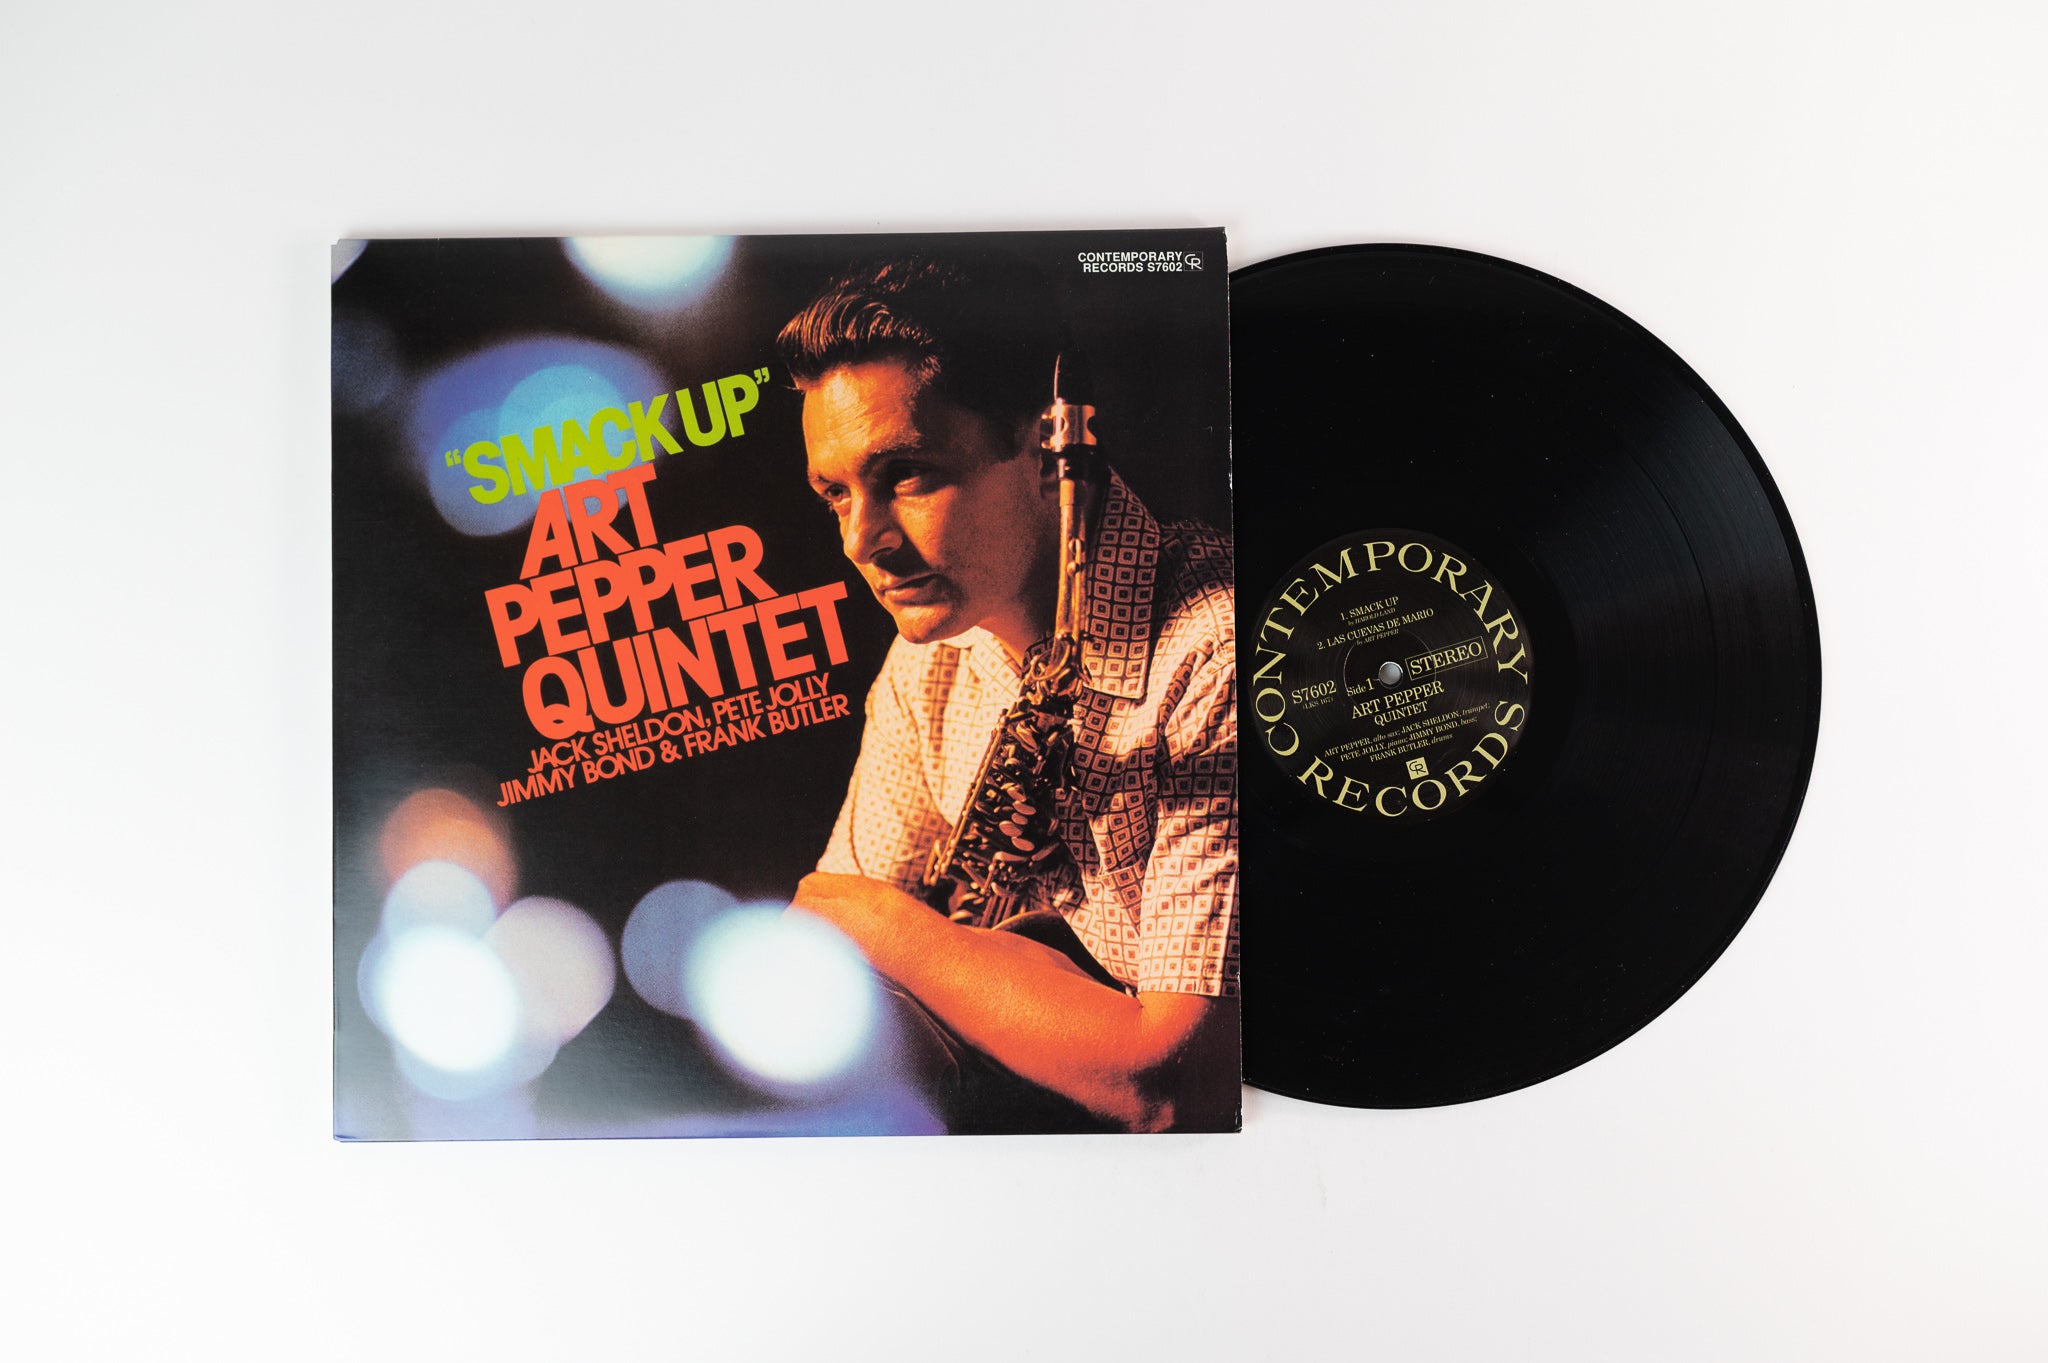 Art Pepper Quintet - Smack Up on Contemporary 45 RPM Ltd Numbered Reissue